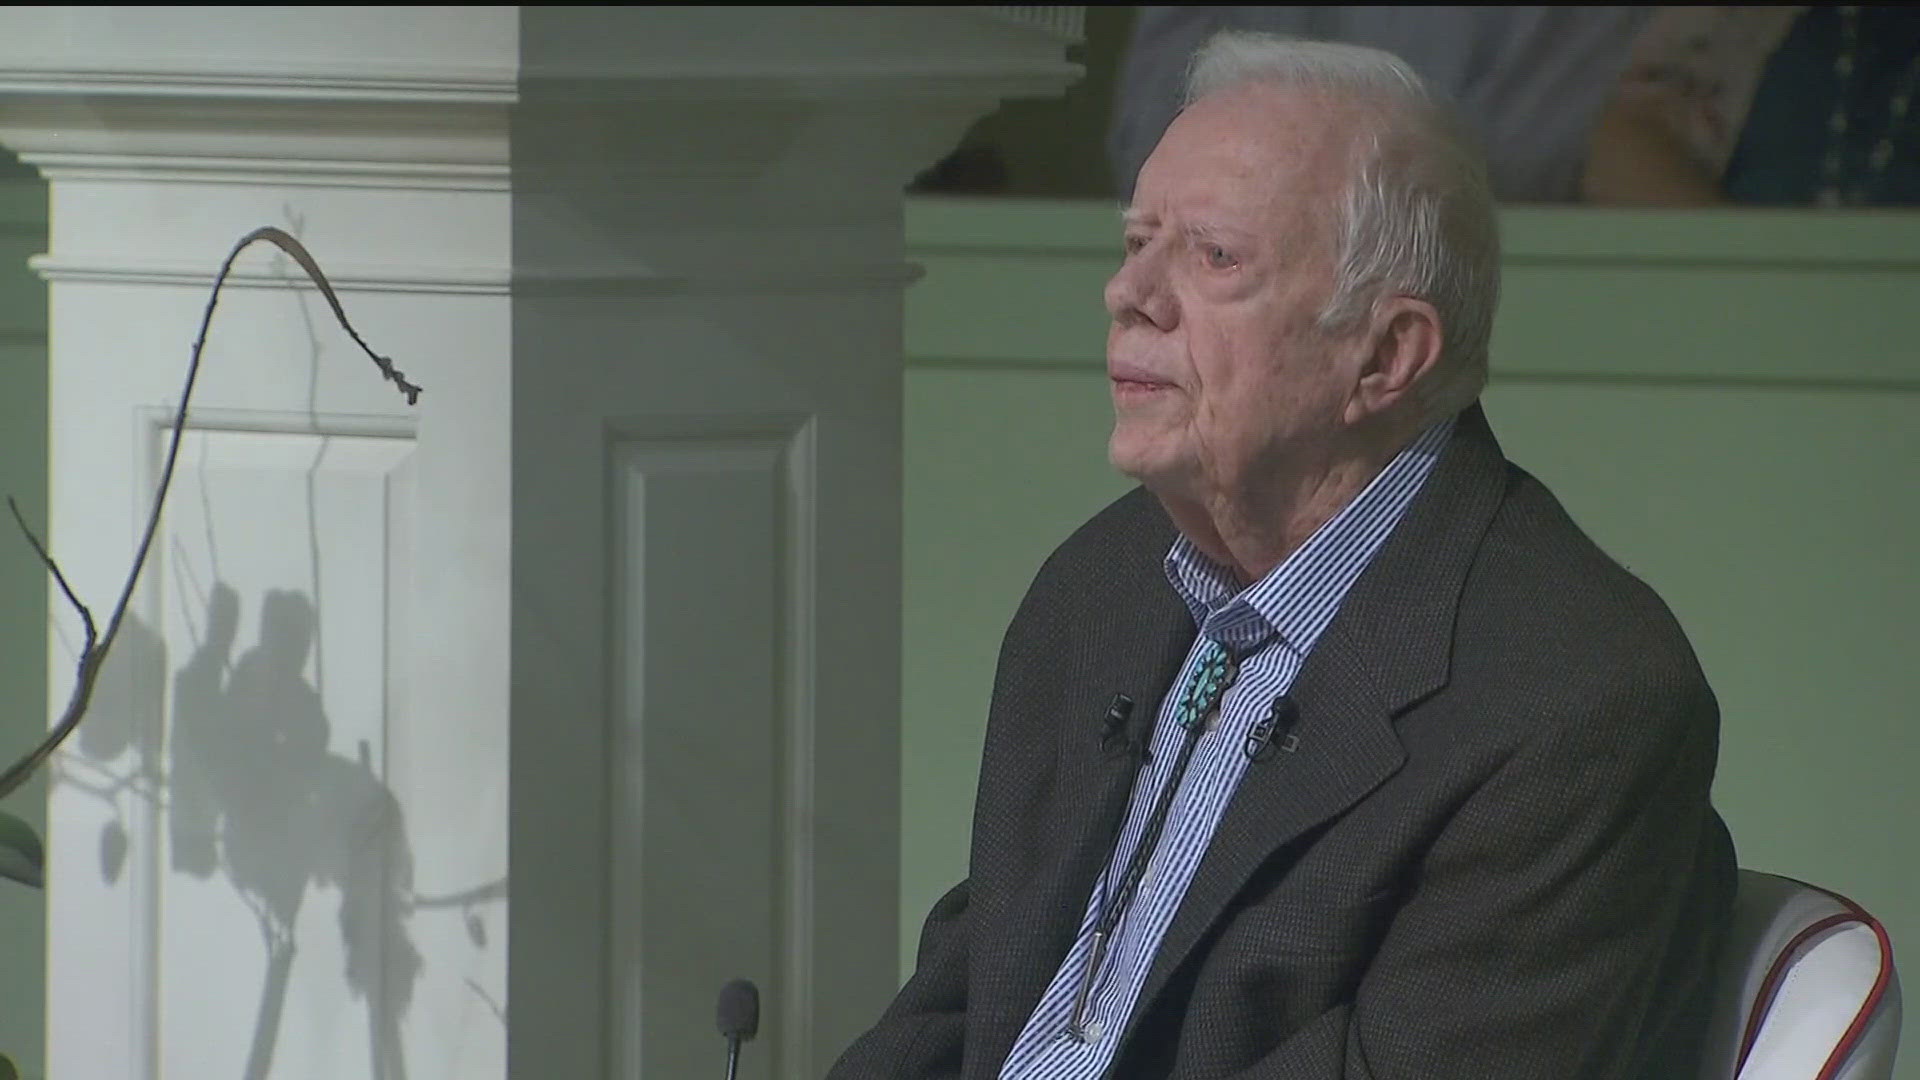 Jason Carter gave a brief update about former President Jimmy Carter on Tuesday at the Rosalynn Carter Georgia Mental Health Forum.